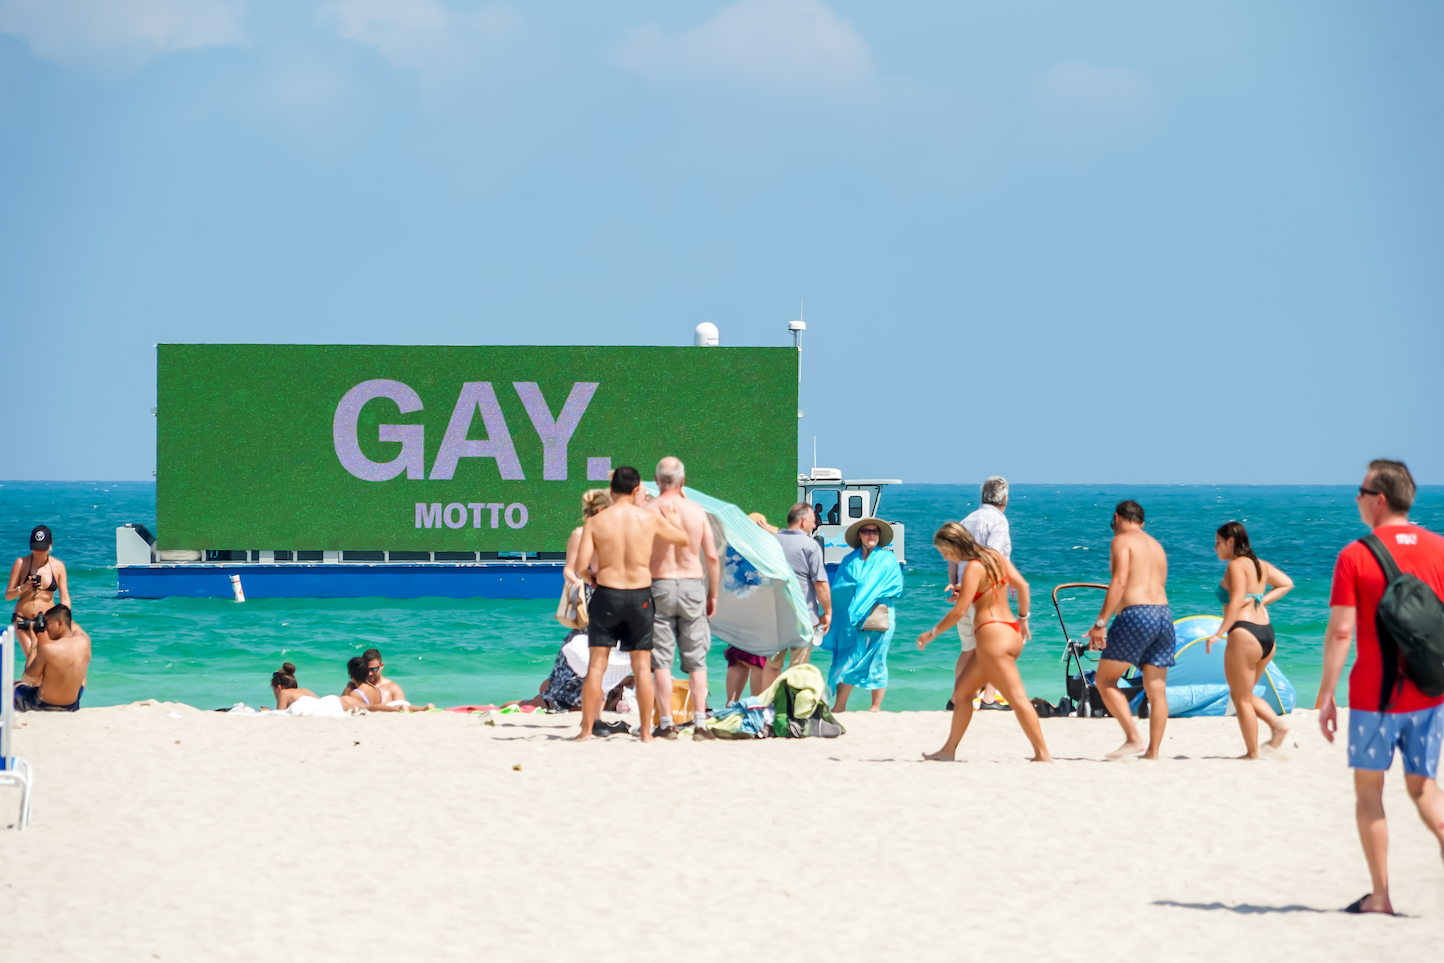 A boat with a digital billboard of the Motto campaign reading GAY seen in the distance behind a group of people at a beach